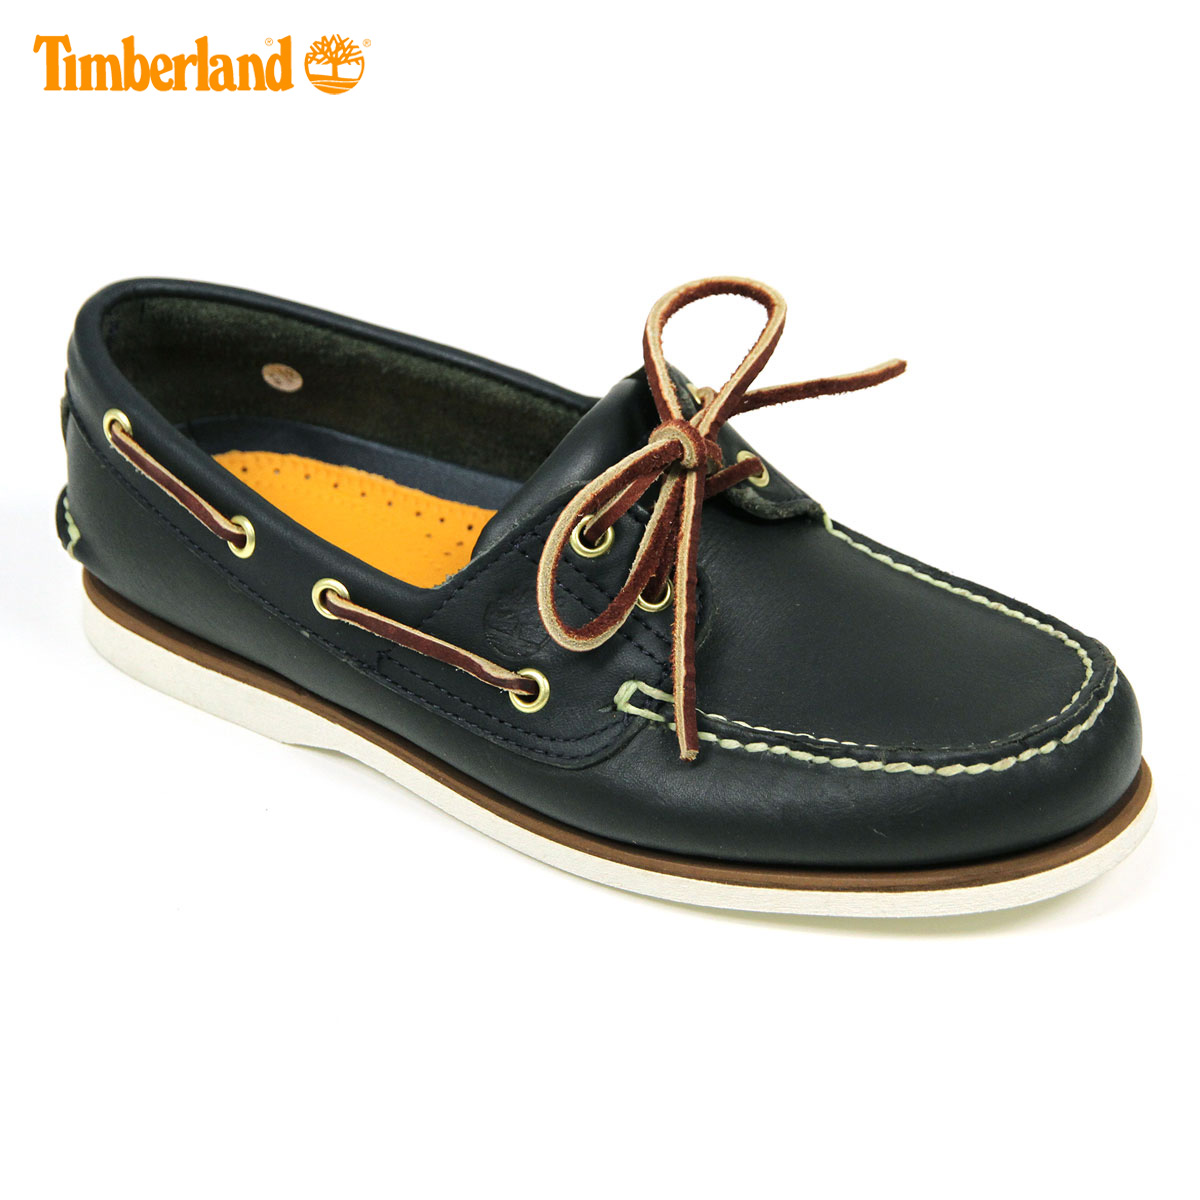 boat shoes